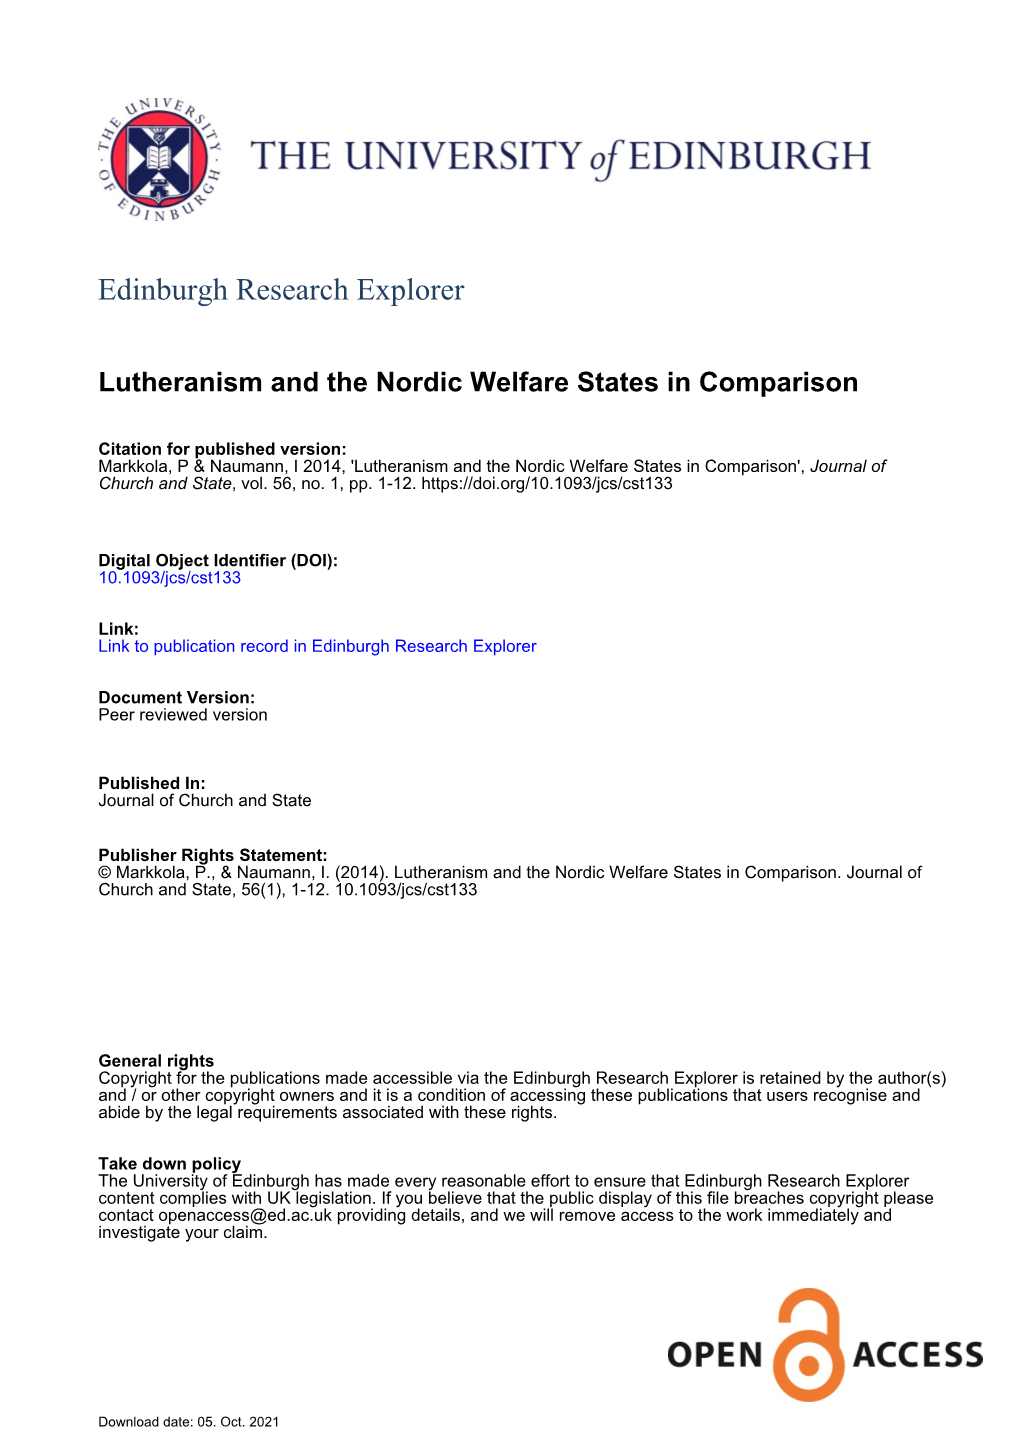 Lutheranism and the Nordic Welfare States in Comparison